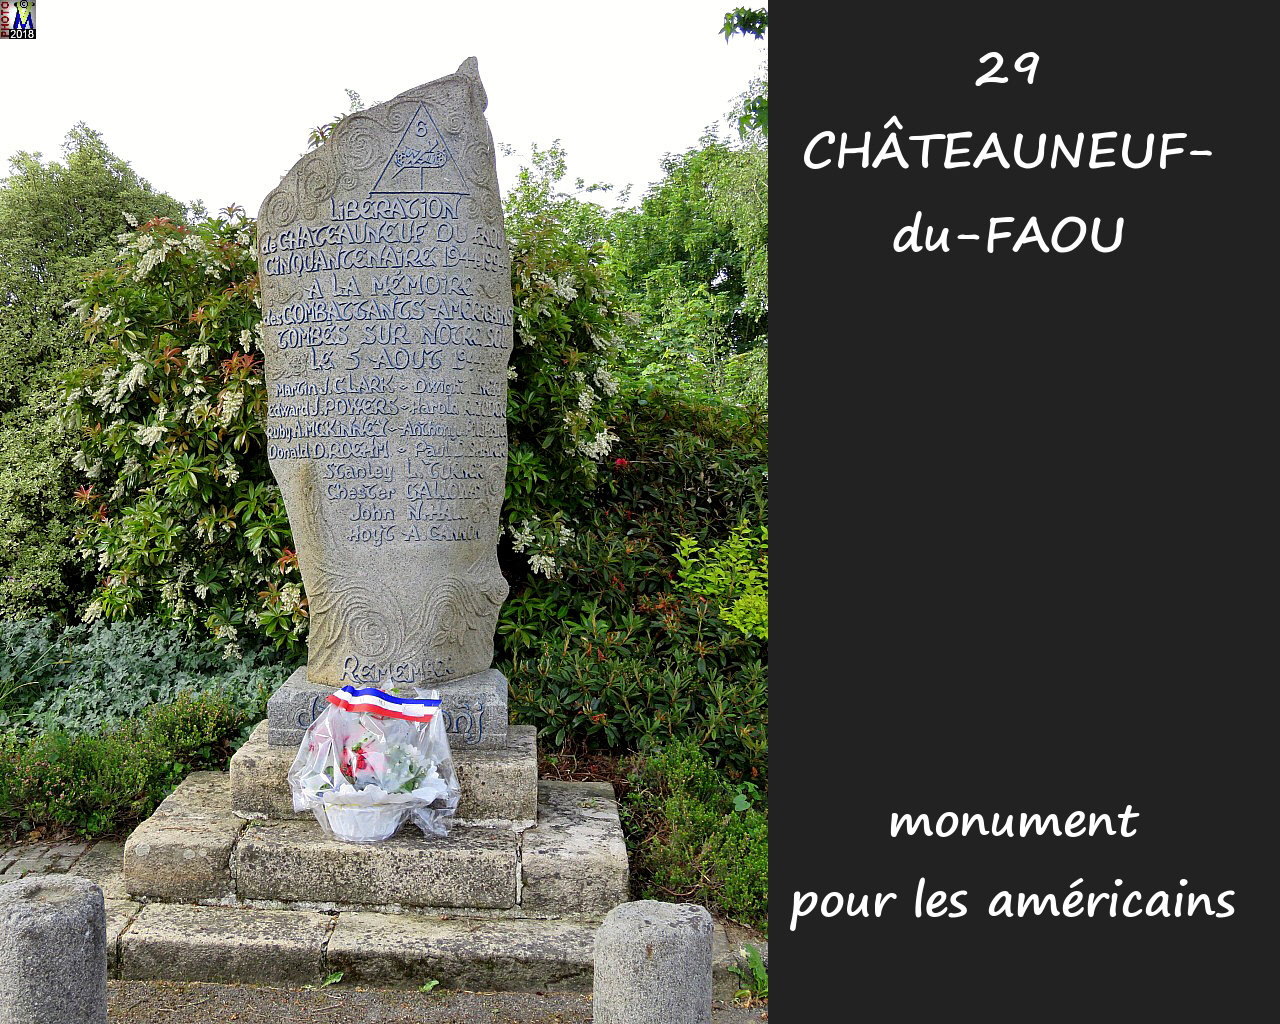 29CHATEAUNEUF-FAOU_monument_100.jpg